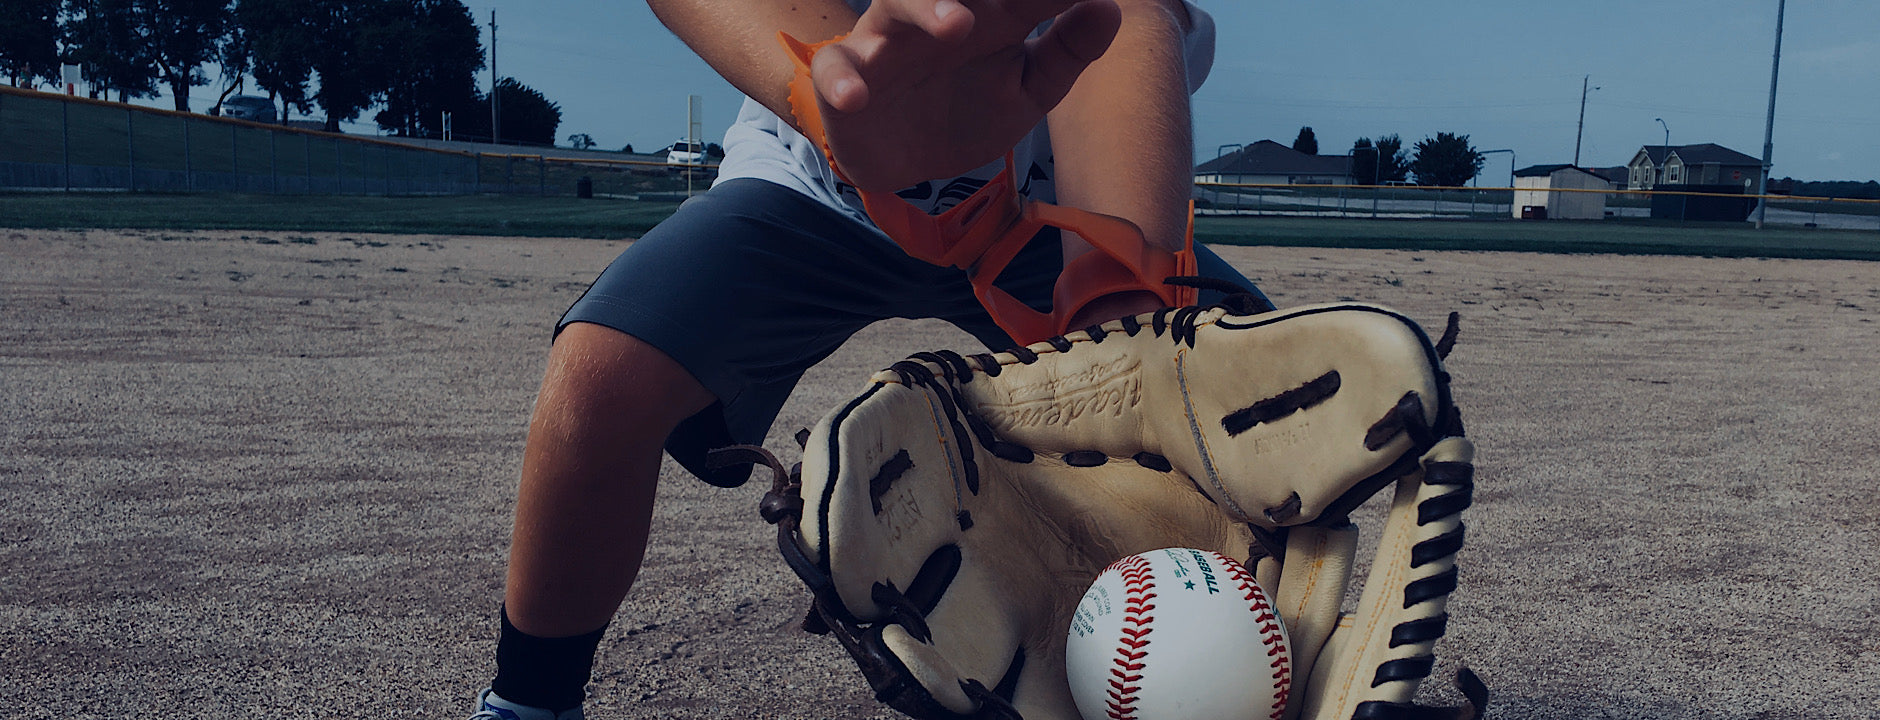 Re-Link two hands fielding aid helps players learn to field with two hands while using their own equipment. It also allows a player to still work on one handed training.